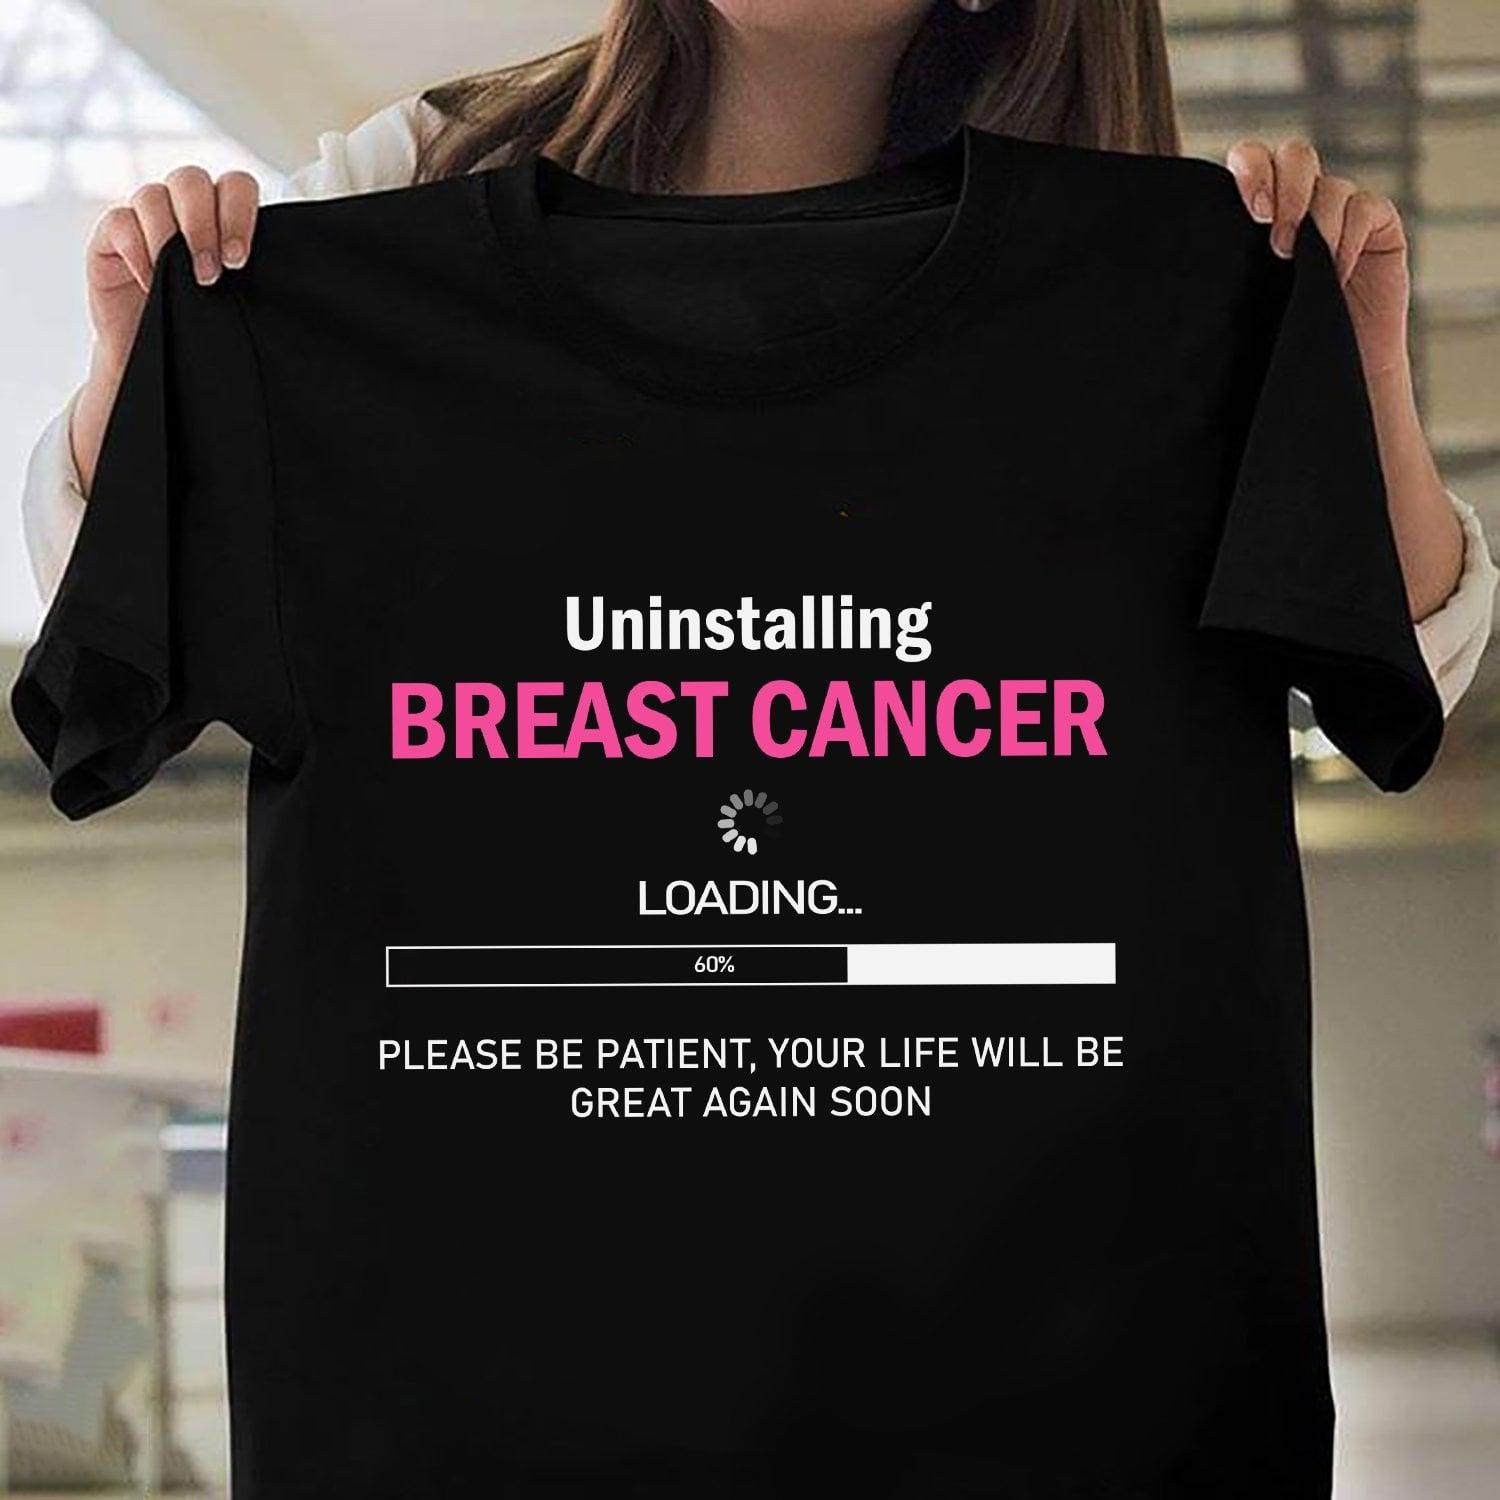 Uninstalling breast cancer - Breast cancer awareness, life will be great again